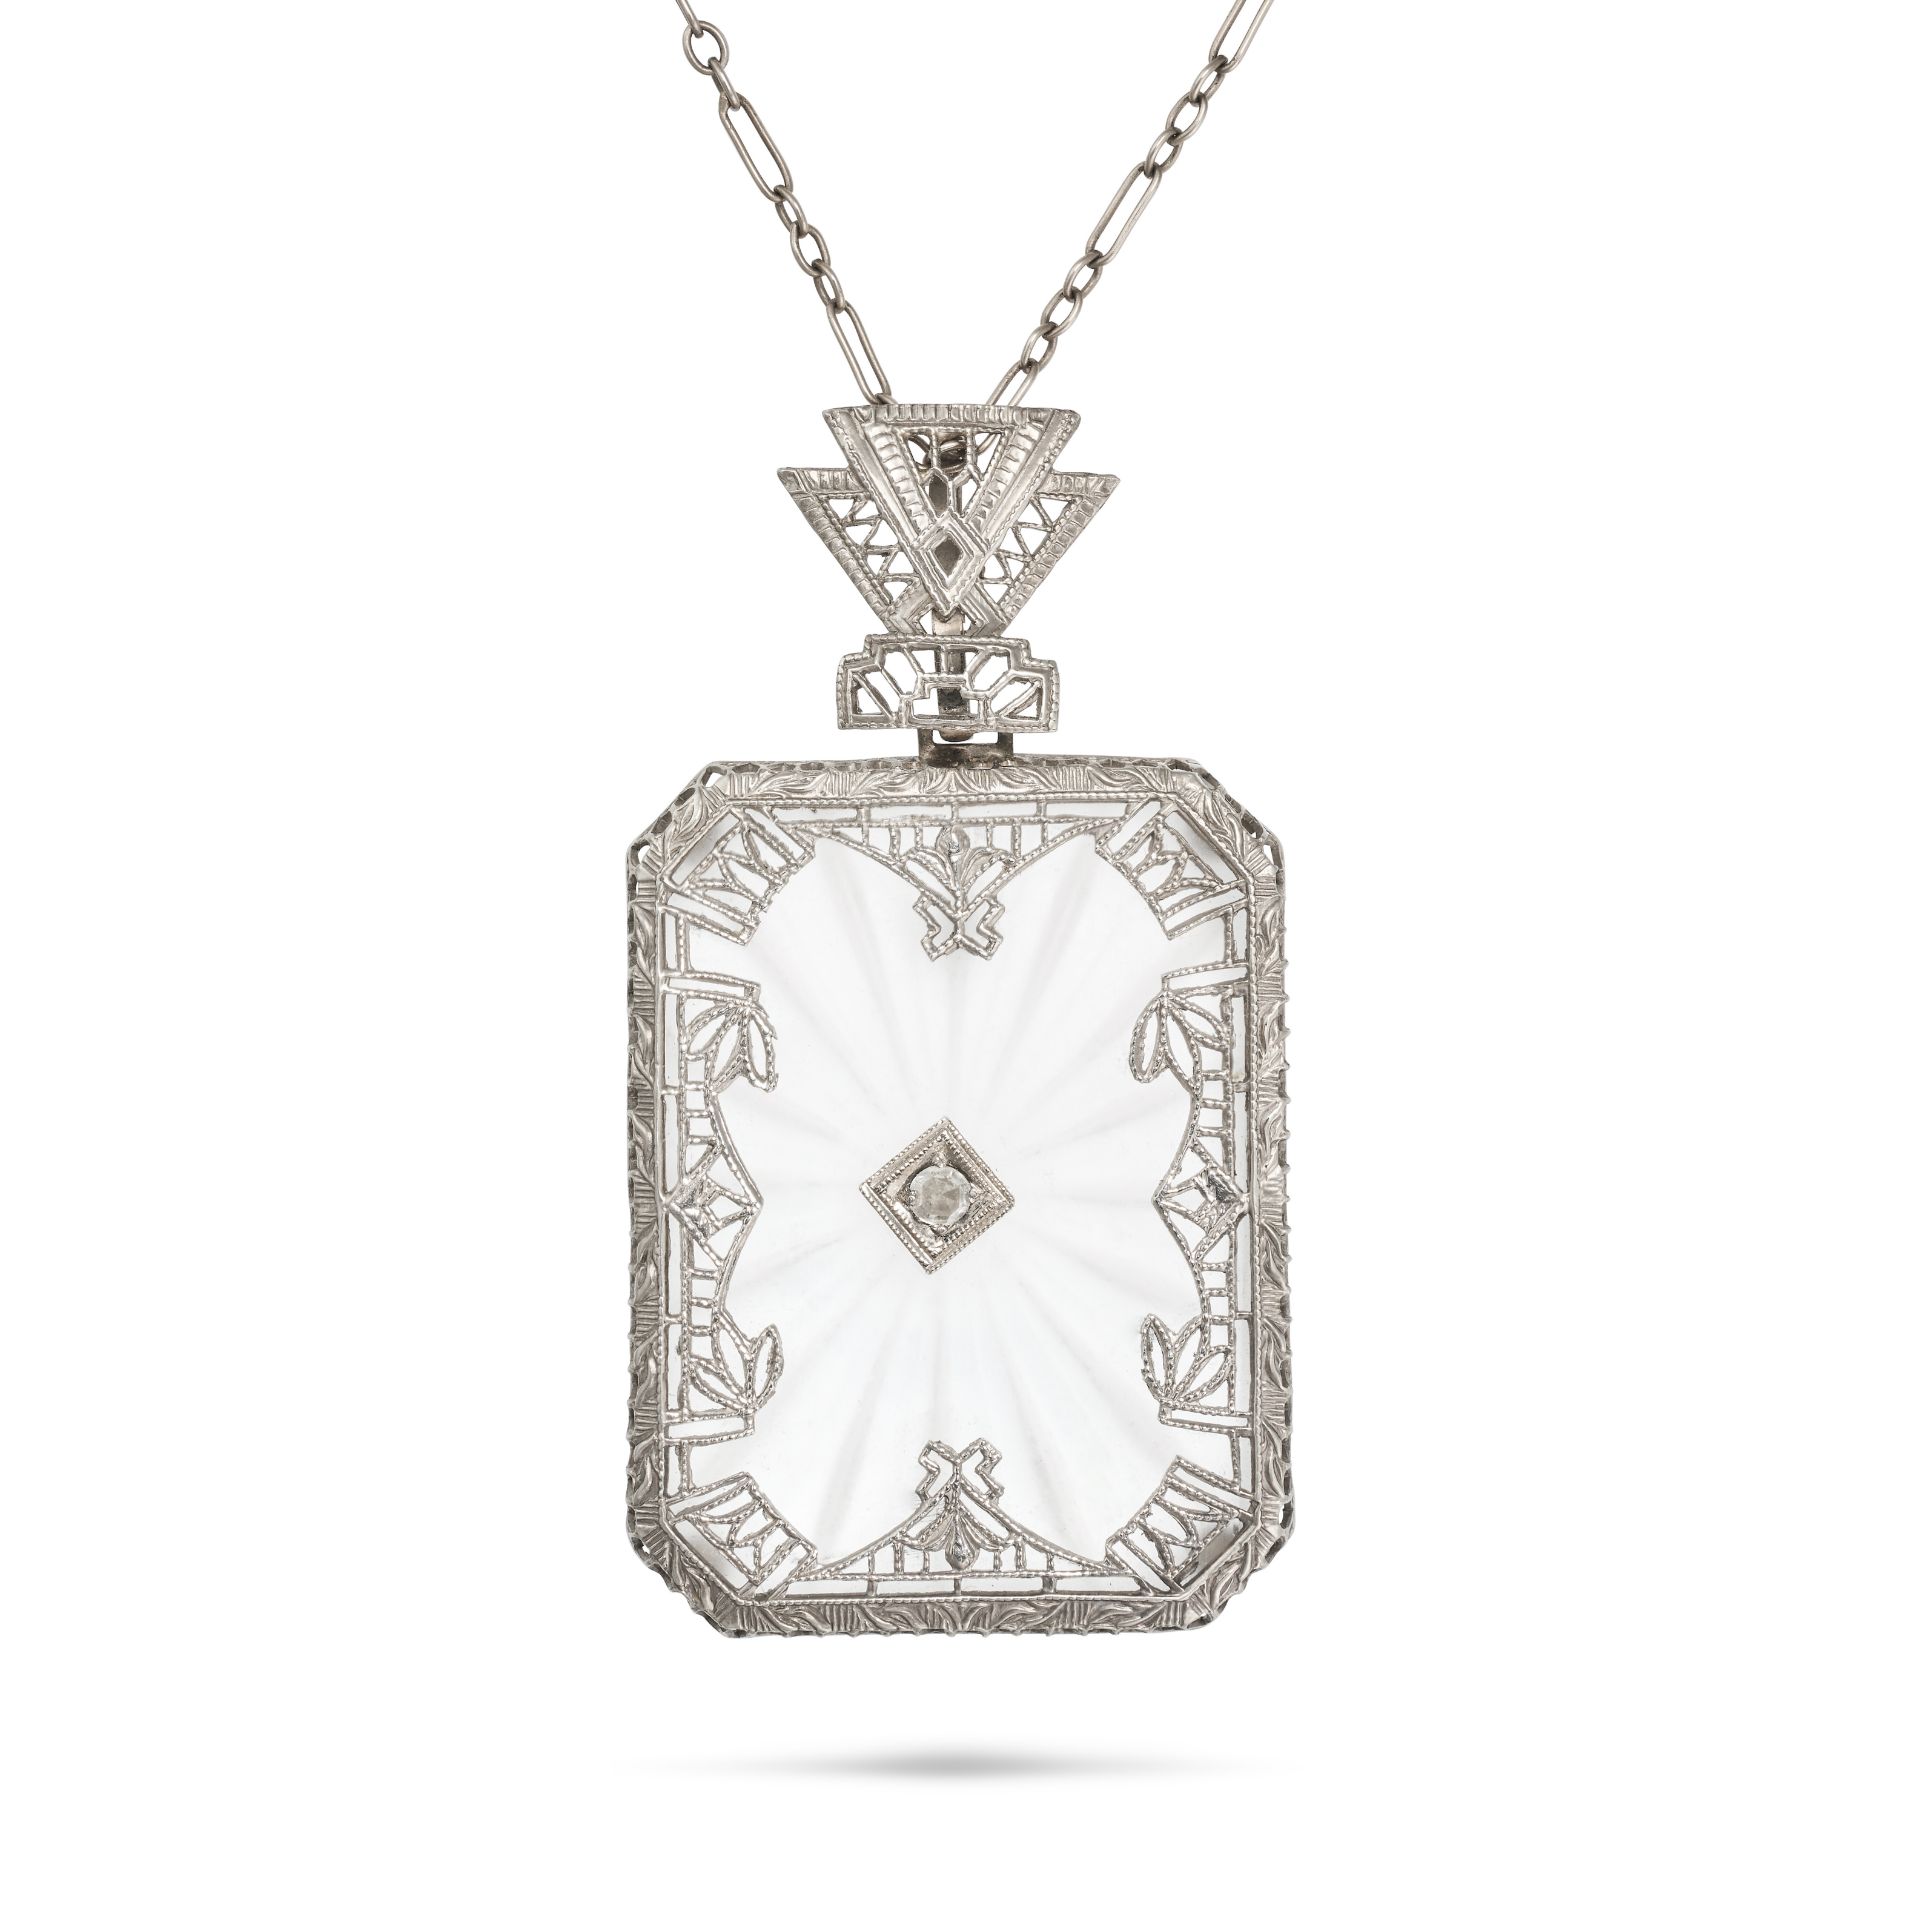 NO RESERVE - A ROCK CRYSTAL AND DIAMOND PENDANT NECKLACE the pendant comprising a frosted rock cr...